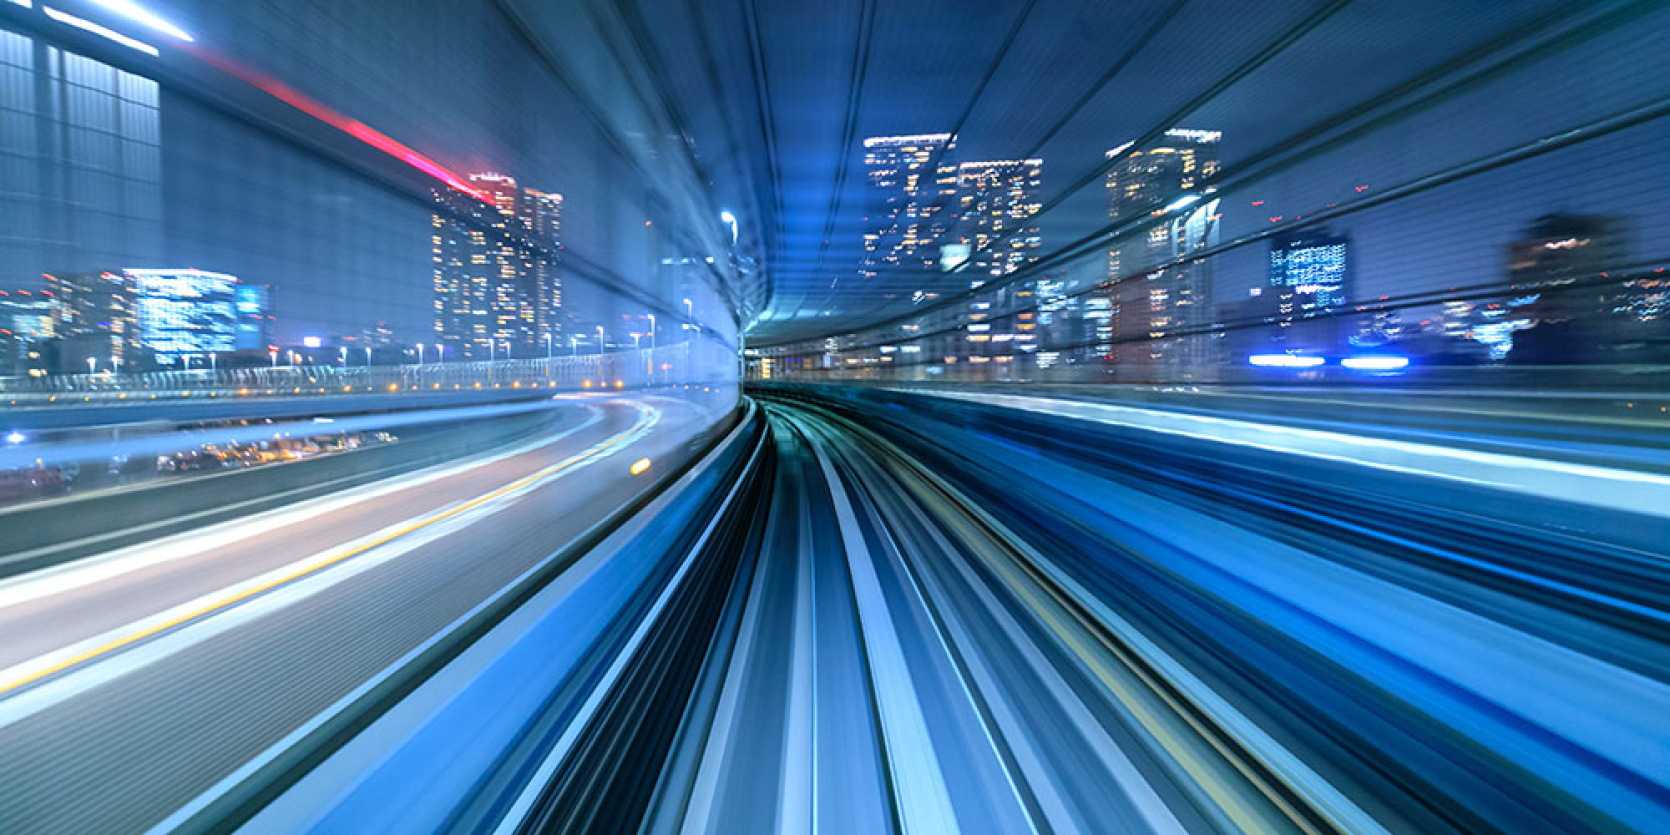 HOW 5G IS DRIVING THE FUTURE OF SMART RAILWAYS AND TRANSPORT